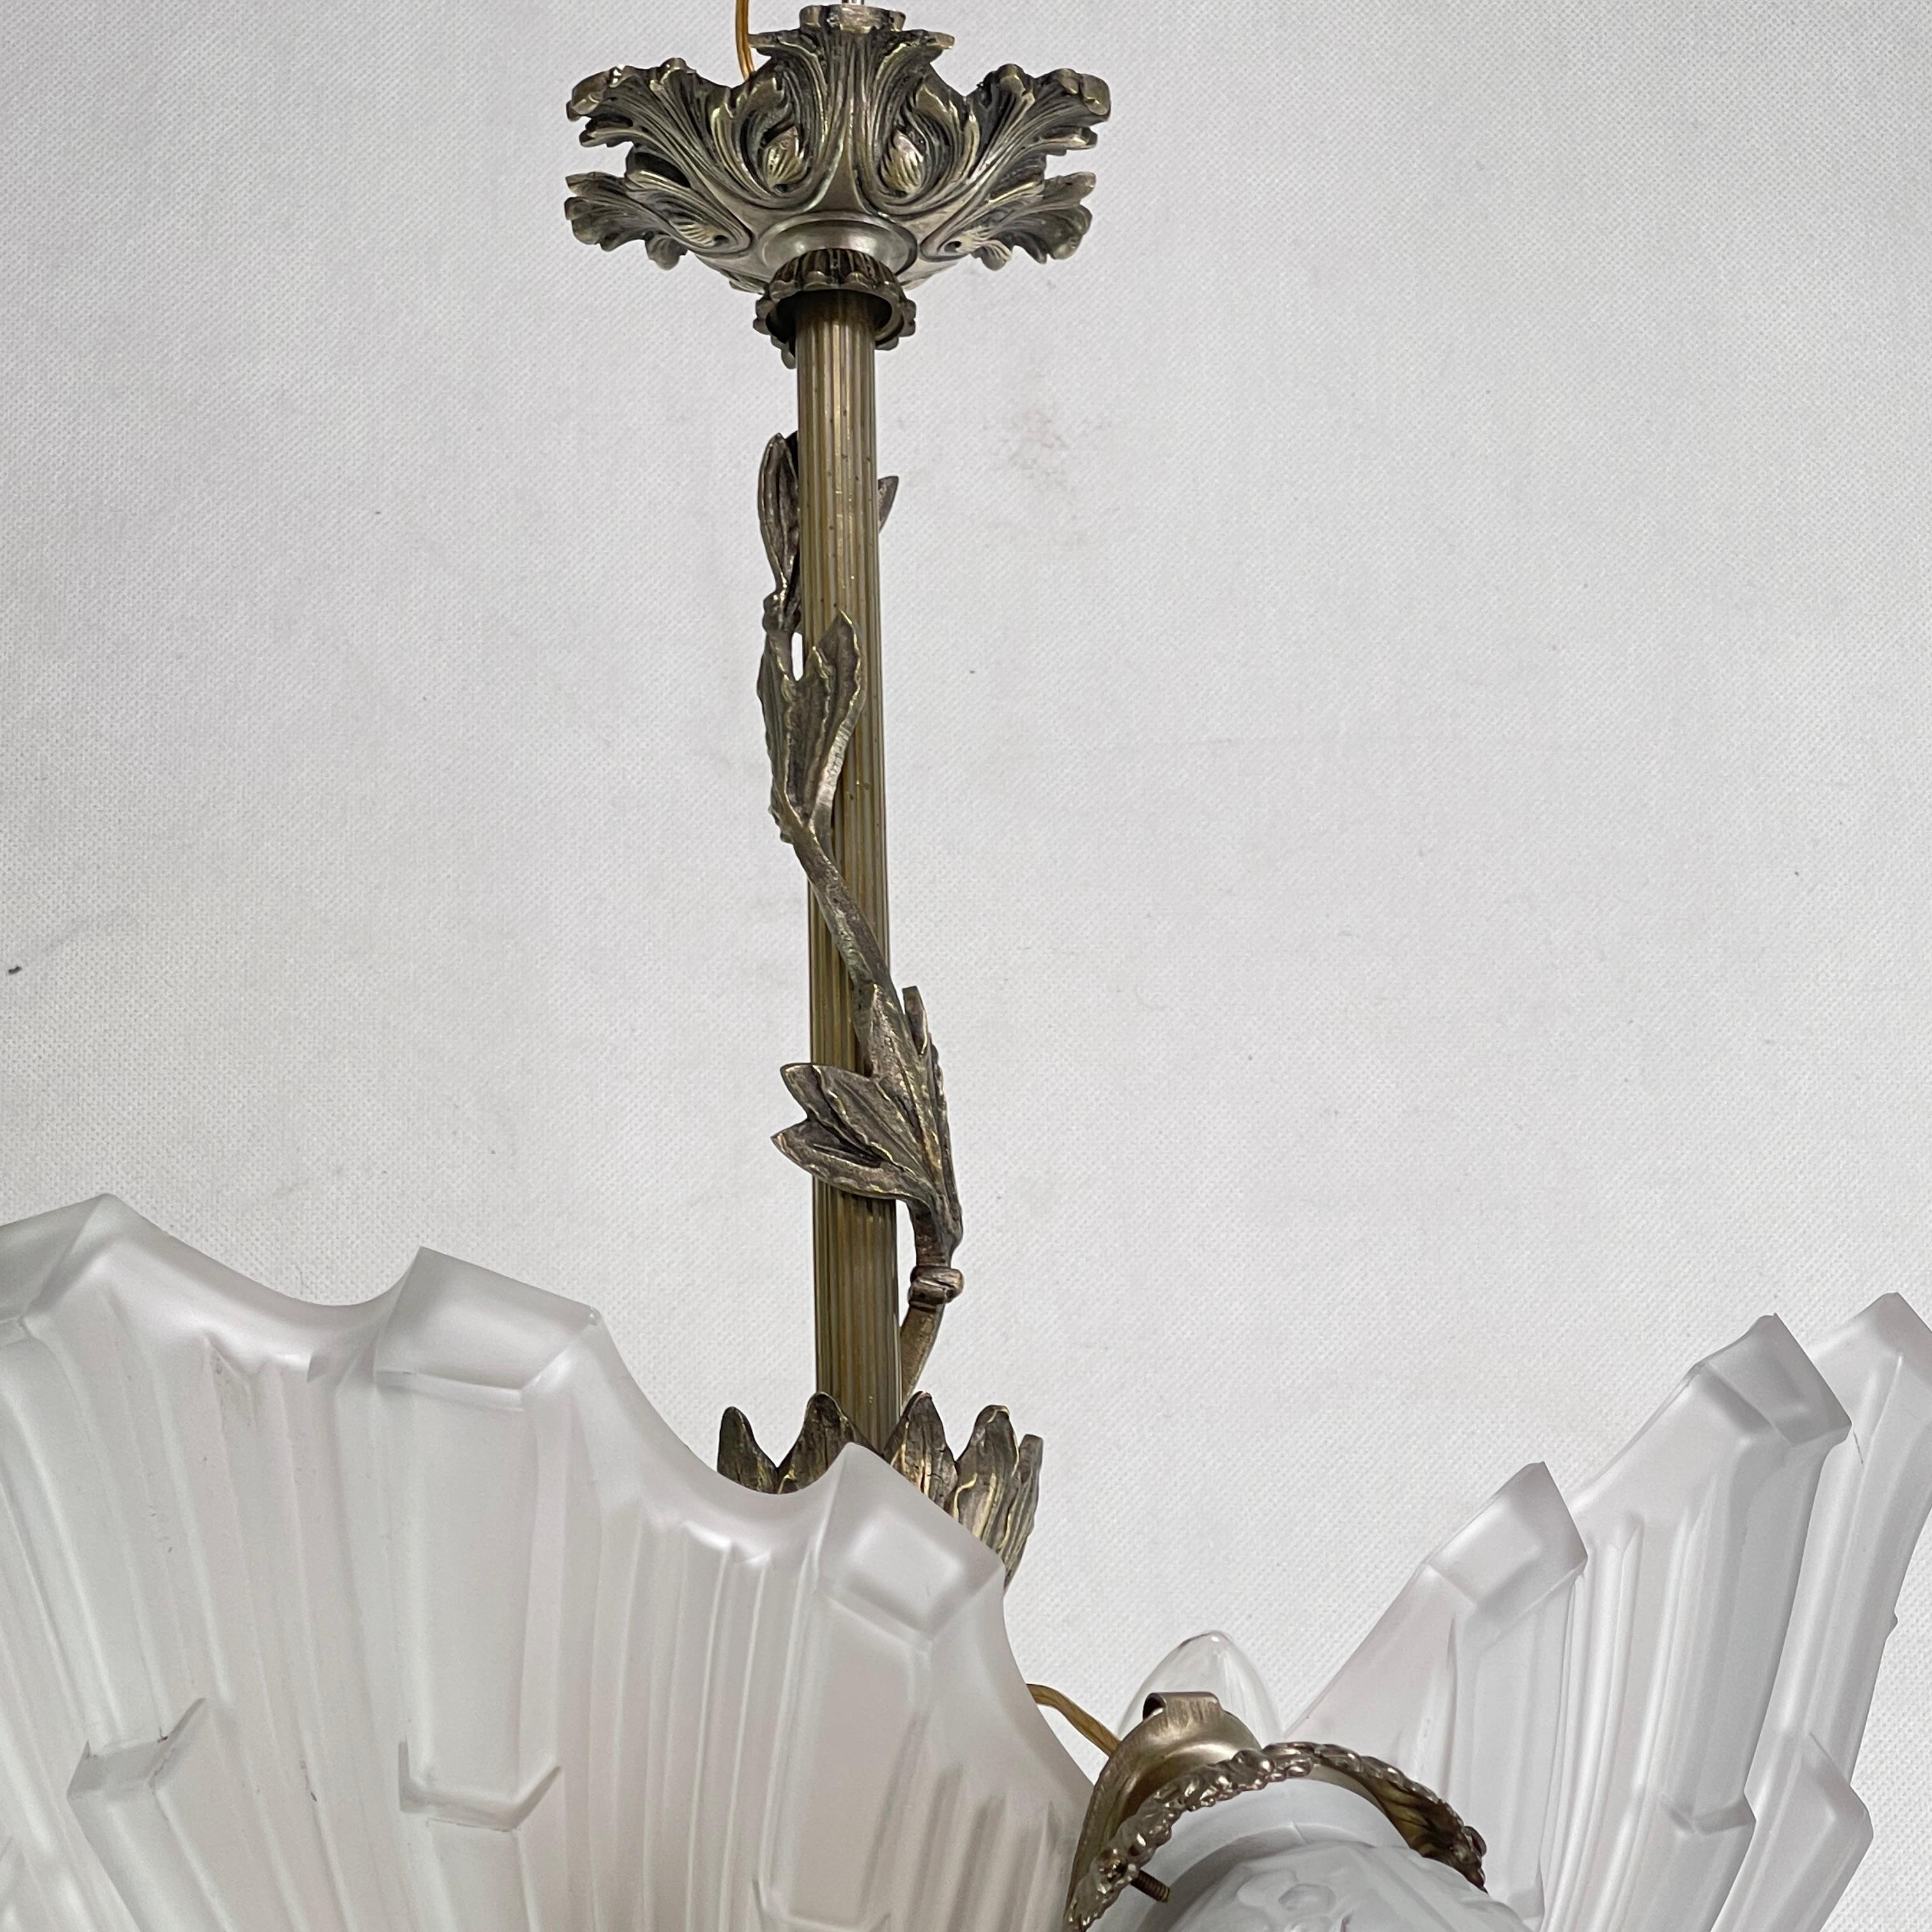 20th Century ART DECO Shell Lamp by Maynadier Chandelier Hanging Lamp Ceiling Lamp, 1930s